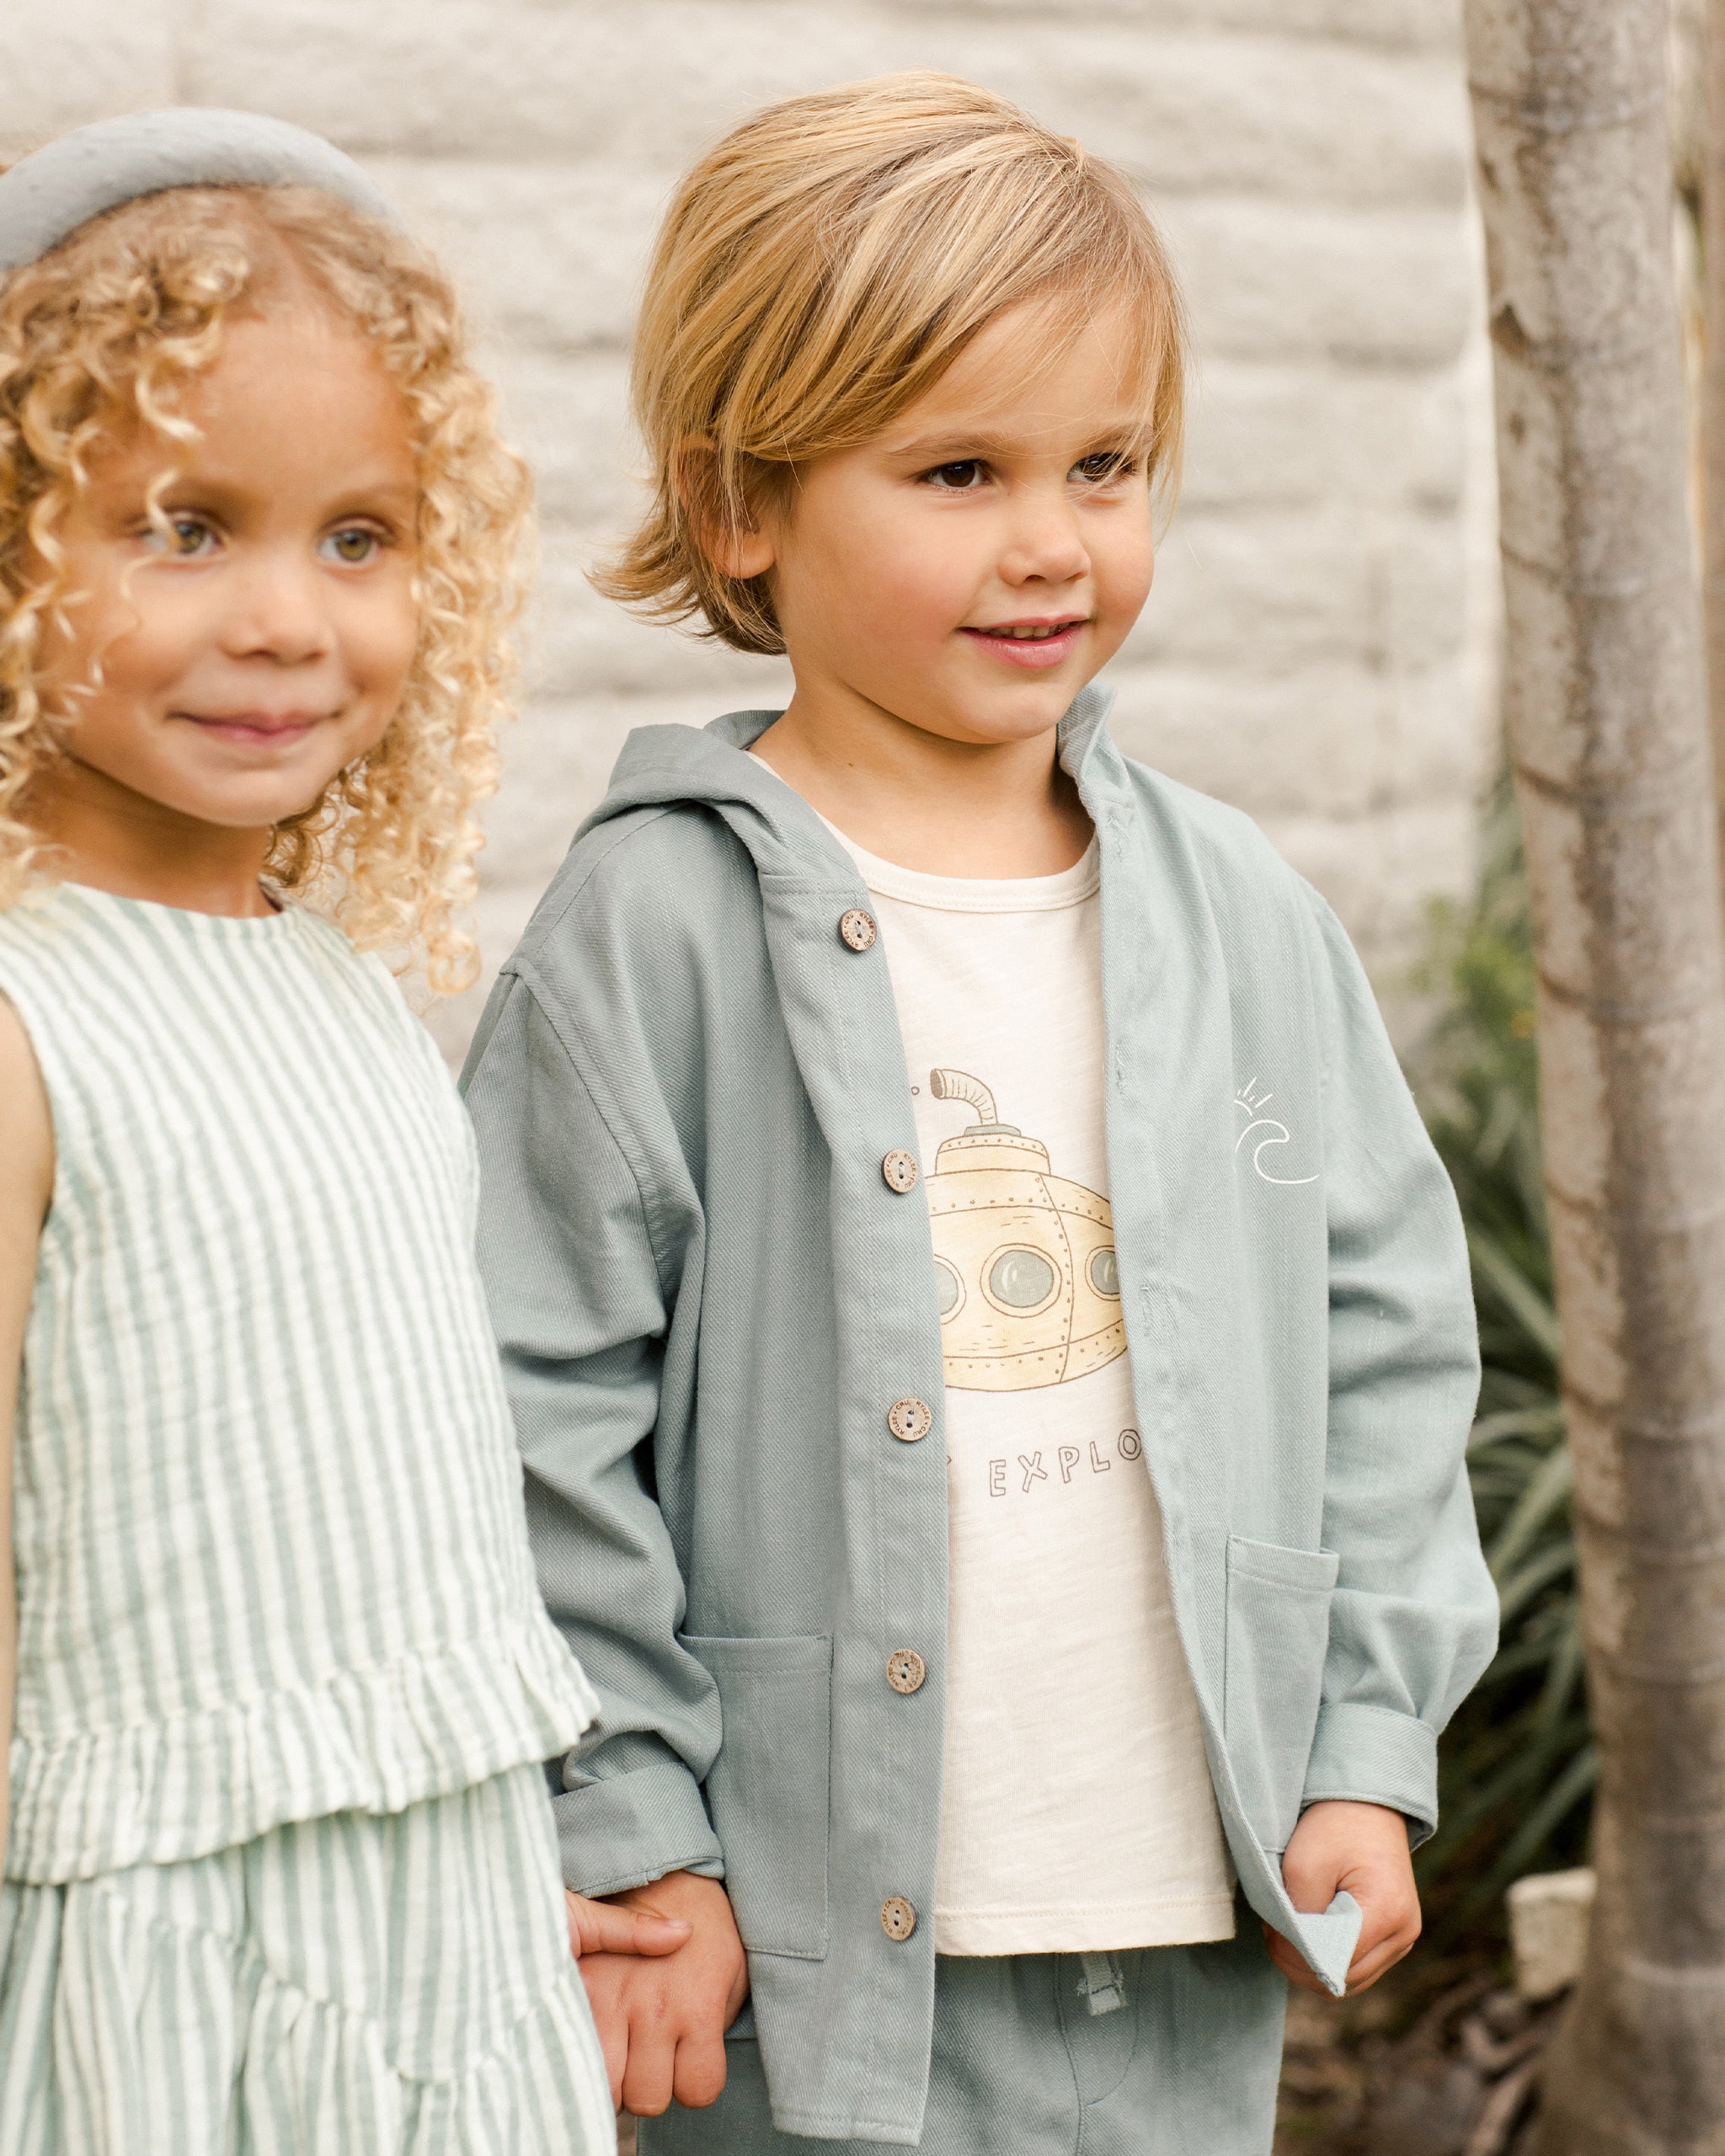 Hooded Overshirt || Aqua - Rylee + Cru | Kids Clothes | Trendy Baby Clothes | Modern Infant Outfits |